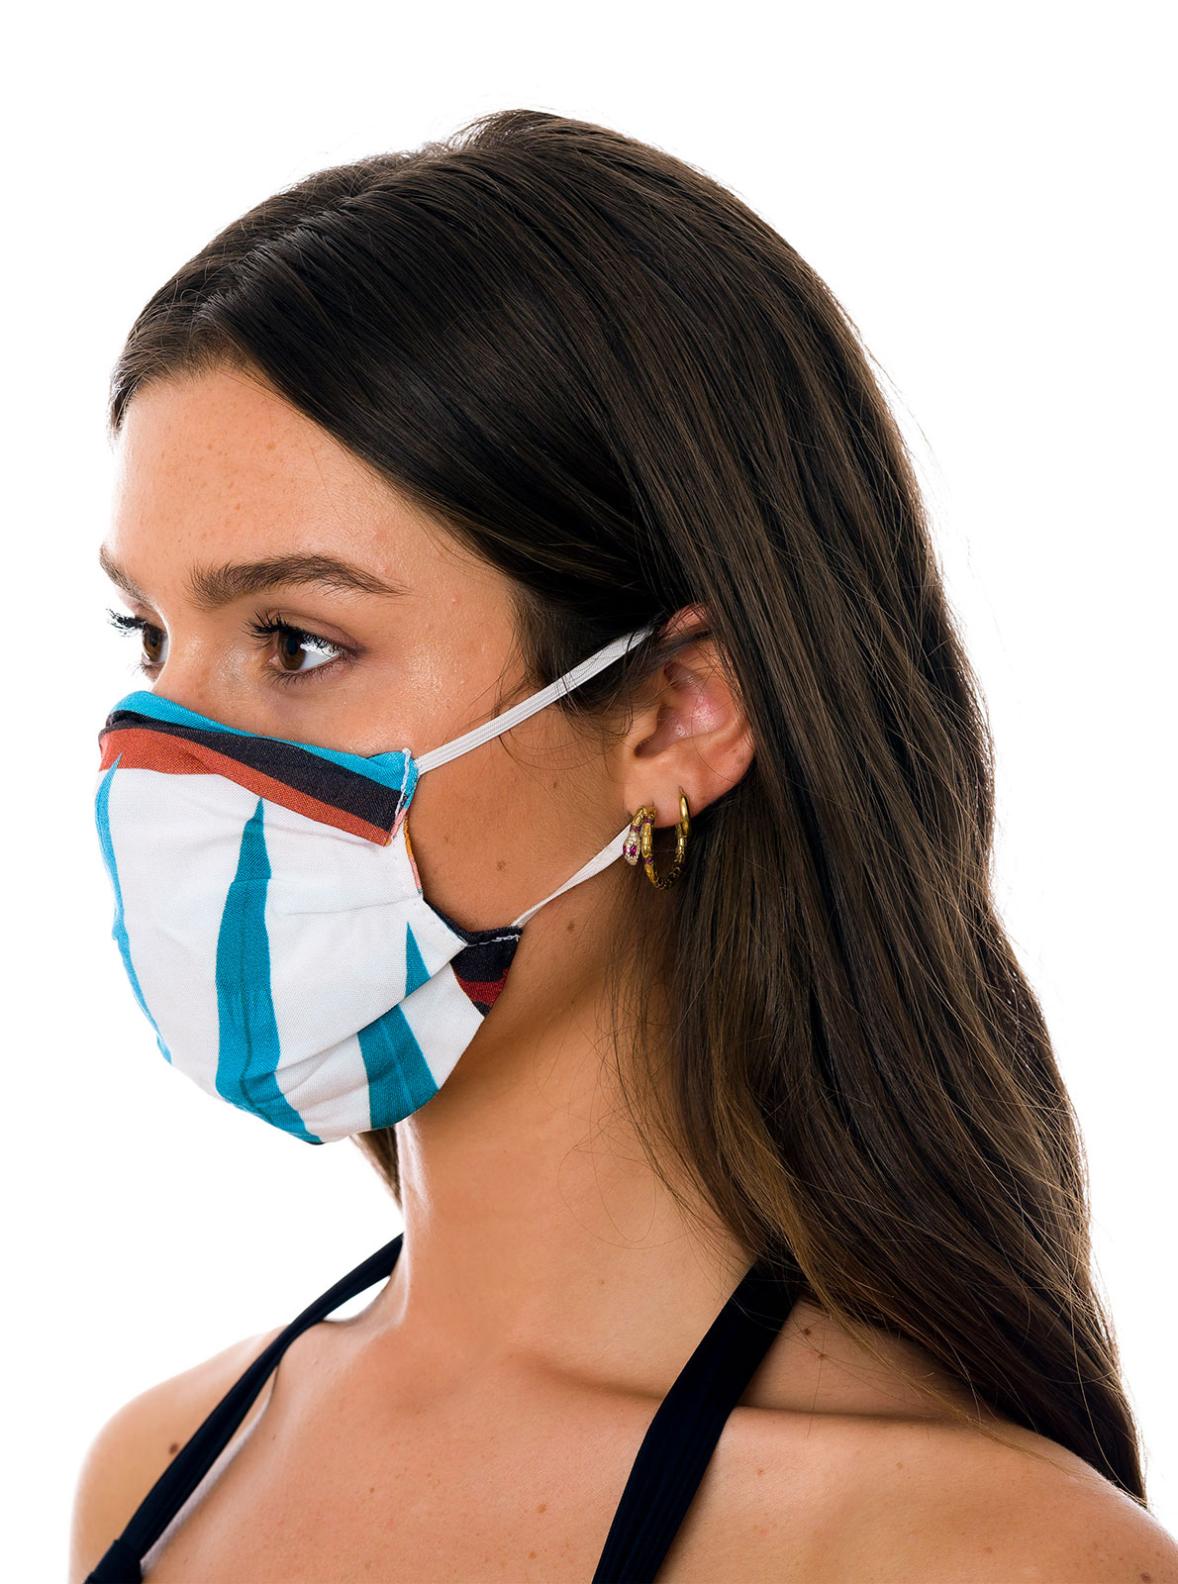 Wearing Health Equipment Protective Social